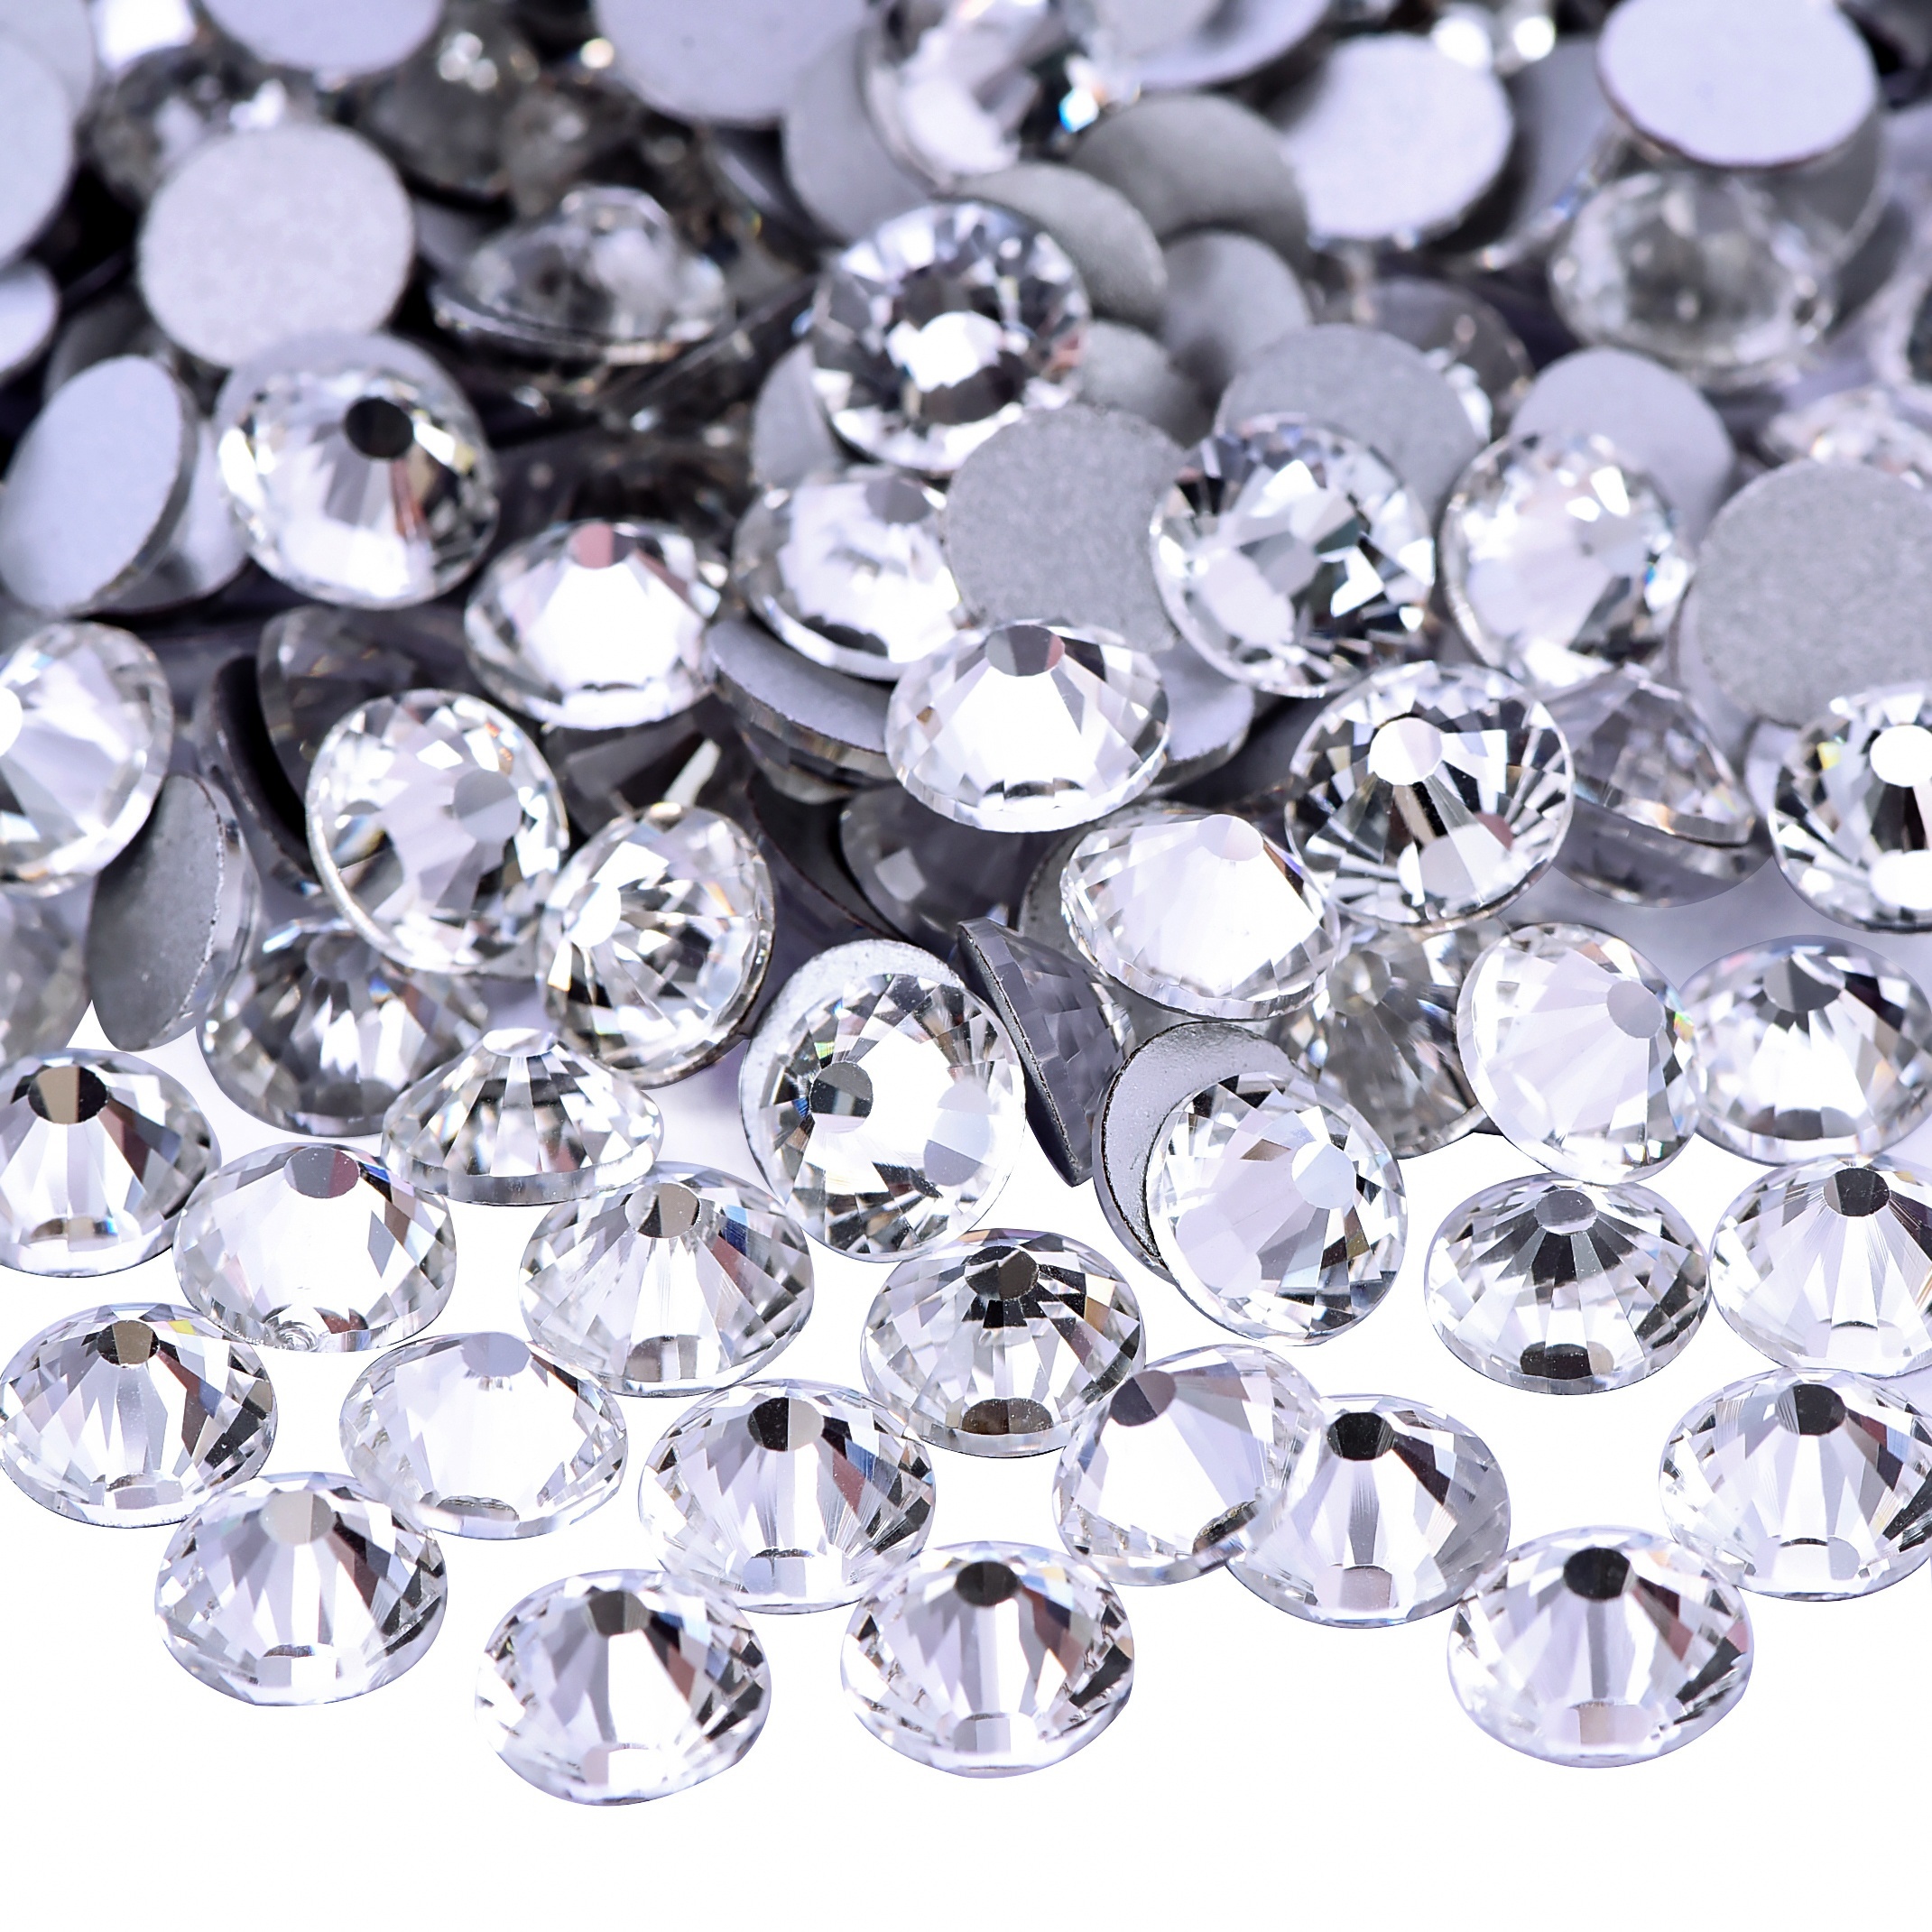 Crystal Clear Crystals, Hot Fix Rhinestones For Crafts Clothing, Flatback  Glass